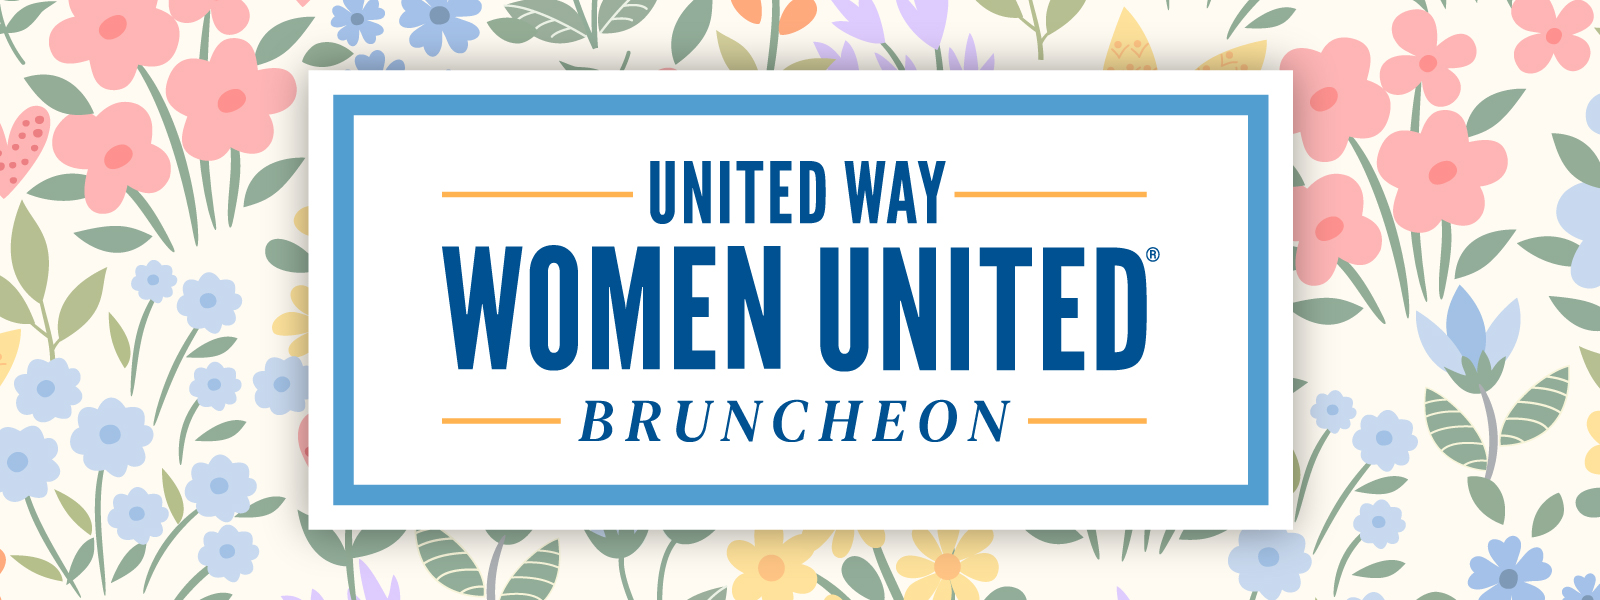 image of Women United Text and Flowers